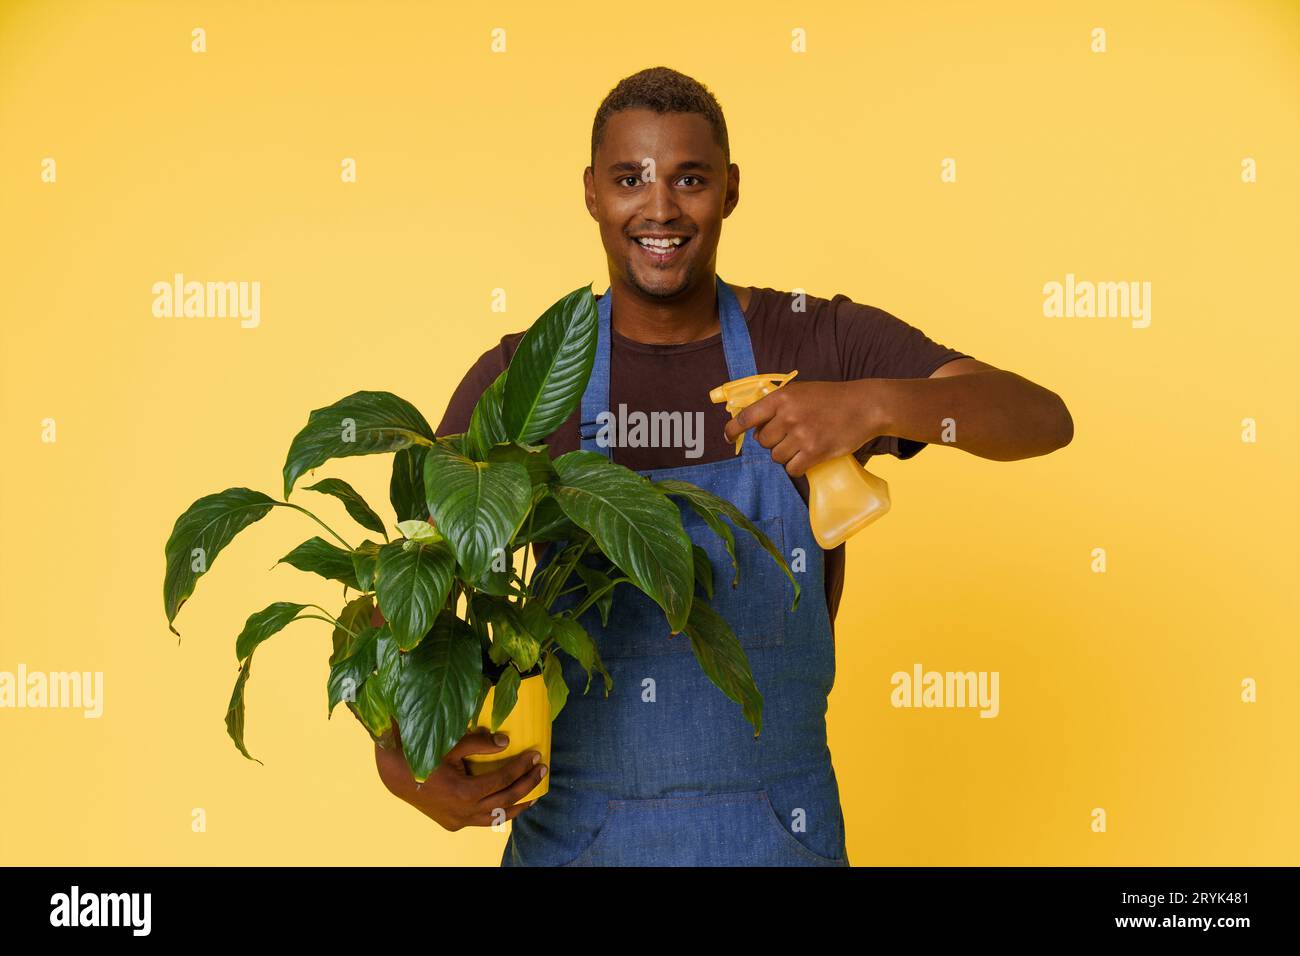 Happy African man splashing water on home flower with copy space on yellow background. Concept for nature, plant care, and garde Stock Photo